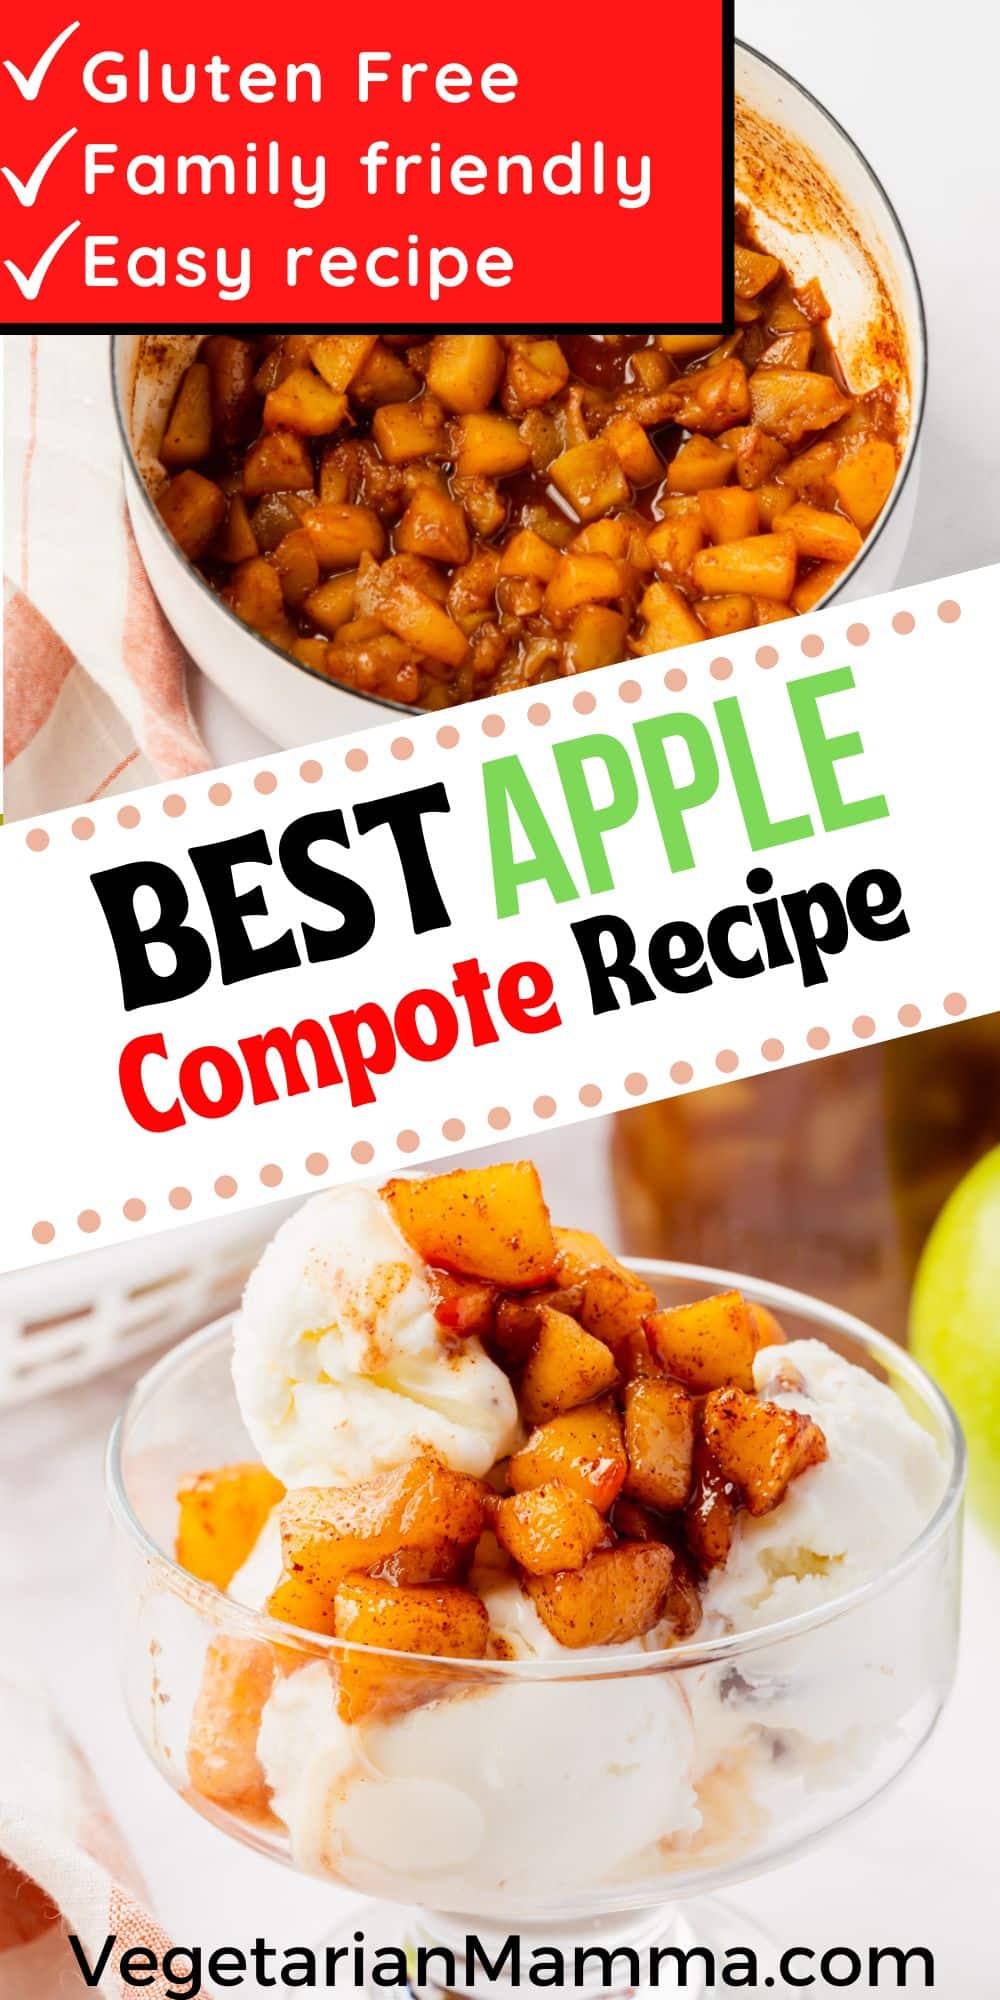 Fresh apples are easily cooked into a spiced Apple Compote that is delicious on everything from pancakes to ice cream. It takes less than 20 minutes to make this tasty apple topping that everyone will love.